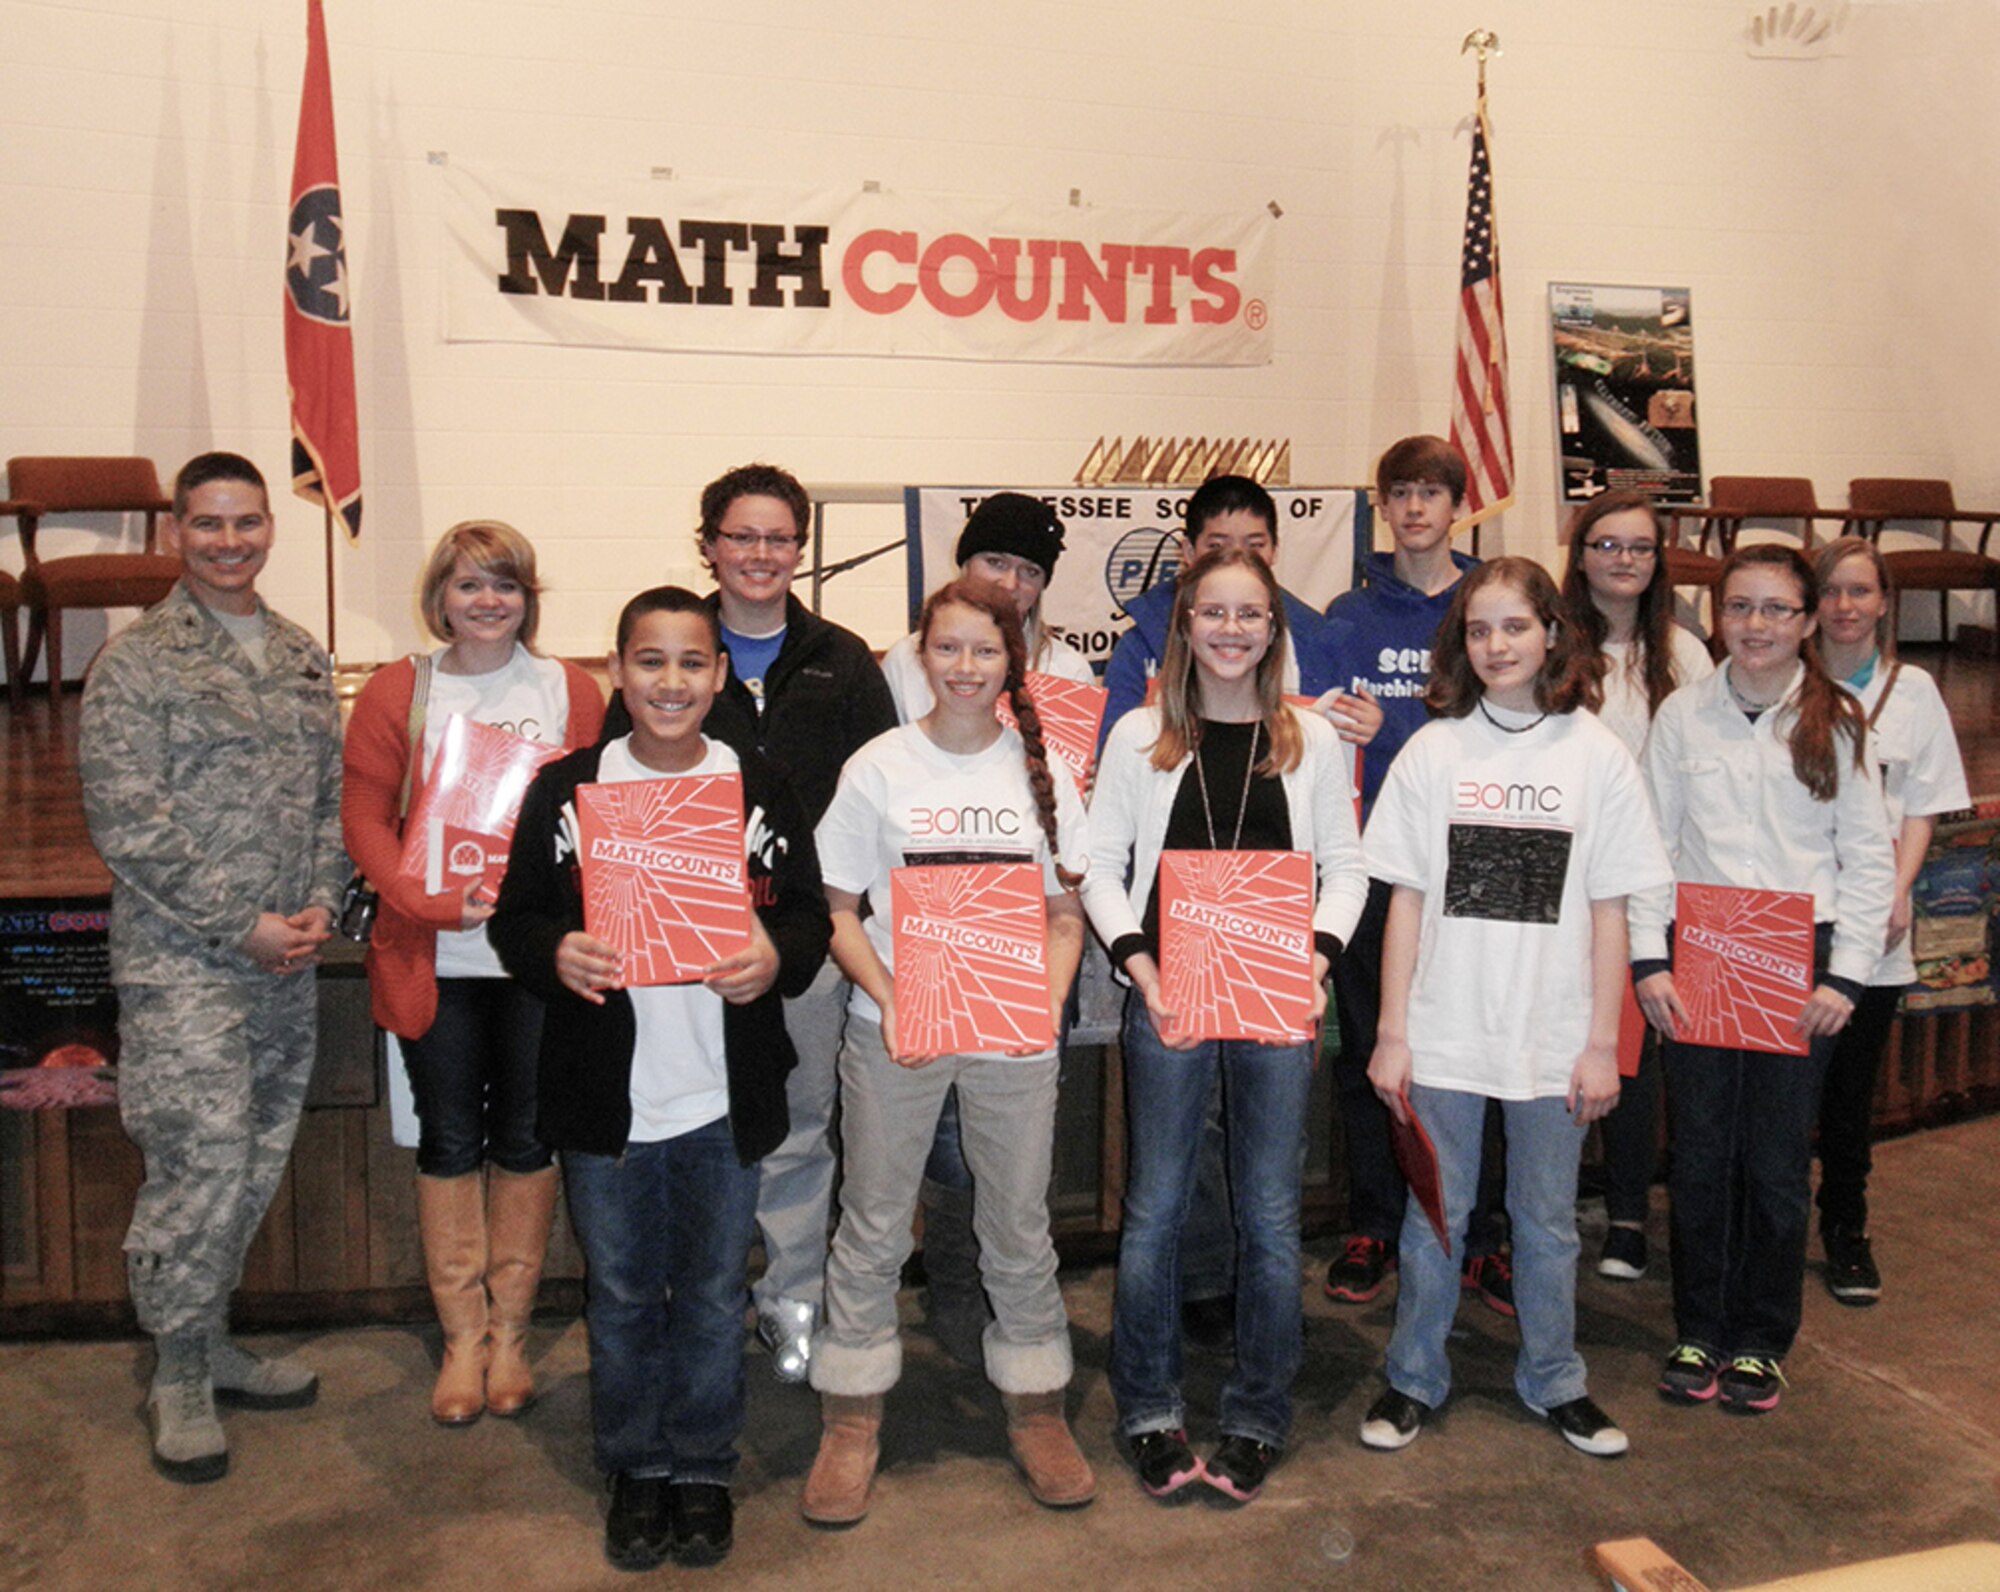 Pictured here are first-time MathCounts competitors from Harris Middle School, including (front row, left to right) Bryan young, 7th grader; Maddie Northcutt, 7th grader; Meghan Barnett, 6th grader;  Kassidy Brown, 7th grader; and Taylor Overcast, 7th grader; back row, from left, Arnold Engineering Development Complex Commander, Col. Raymond Toth, Chelsea Philpott (coach), Olivia Birkey (coach), Britney Herman, 8th grader; Denny Pan, 8th grader; Jesse Smotherman, 8th grader; Menley Saylor, 8th grader; and Marina Nelson, 8th grader. (Photo provided)

